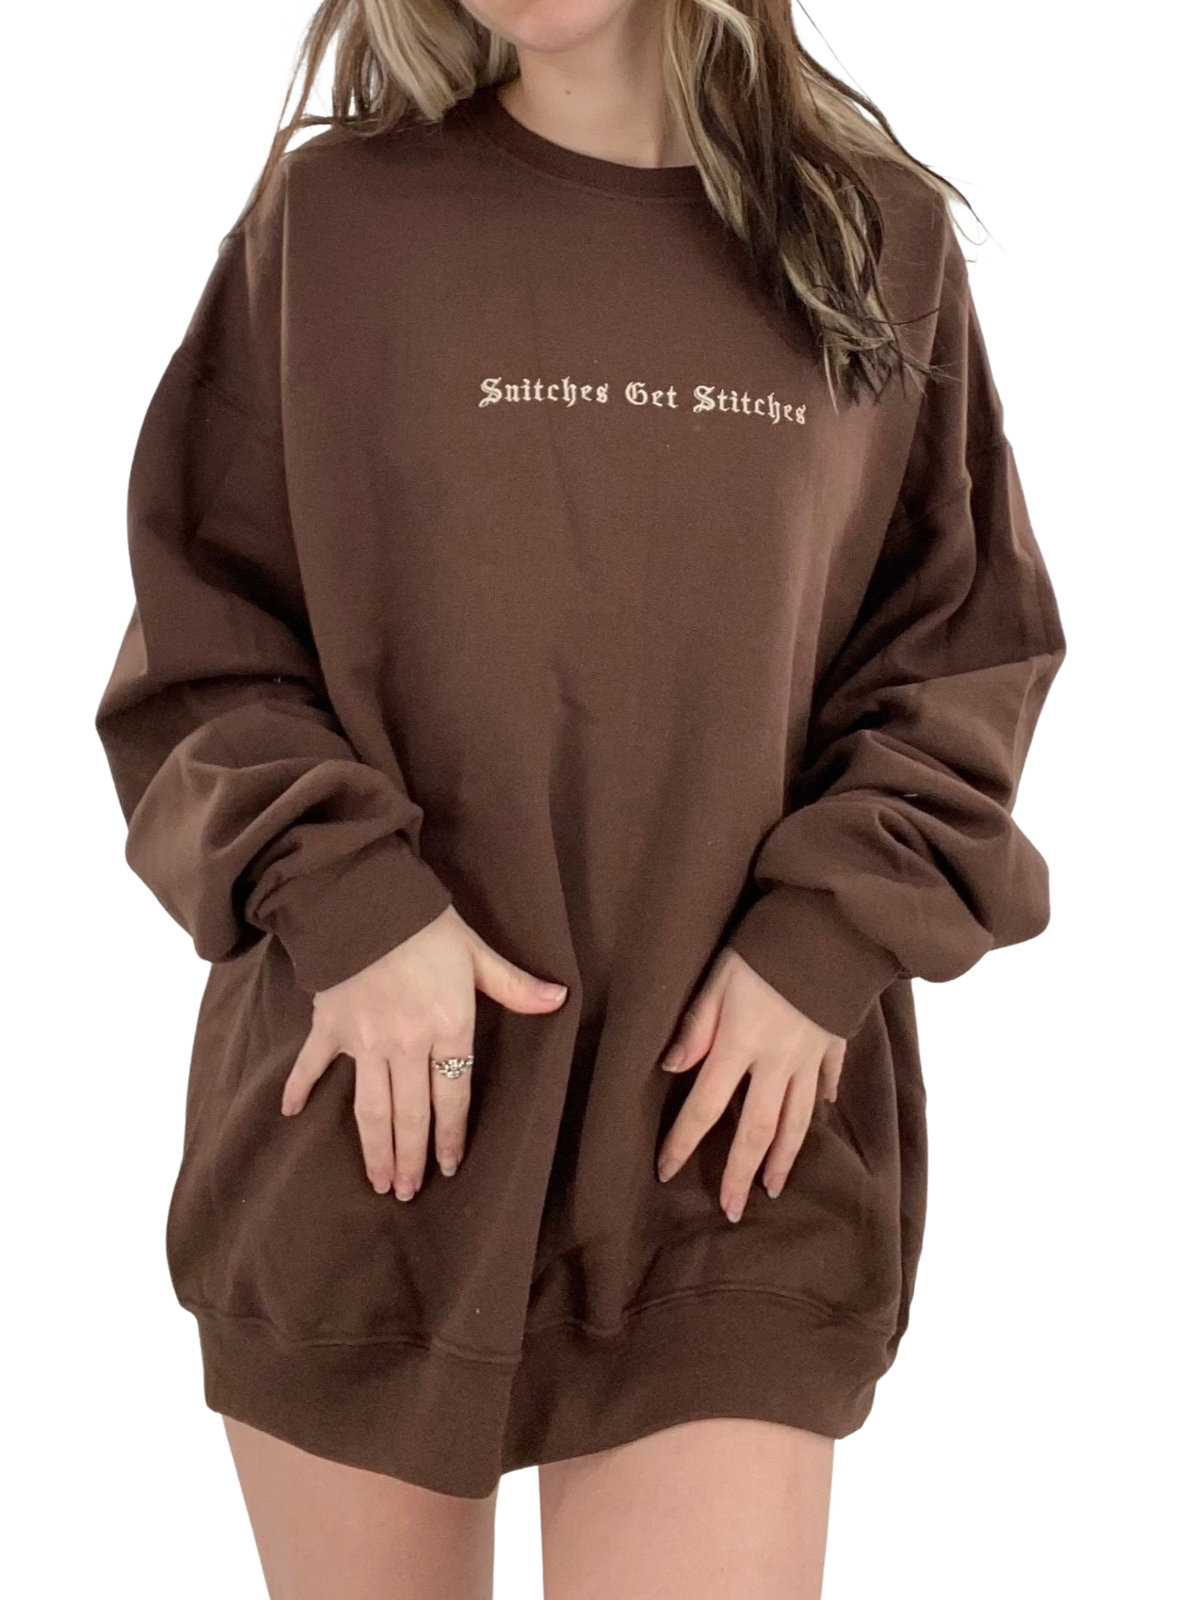 Snitches Get Stitches Embroidered Crewneck or Hoodie